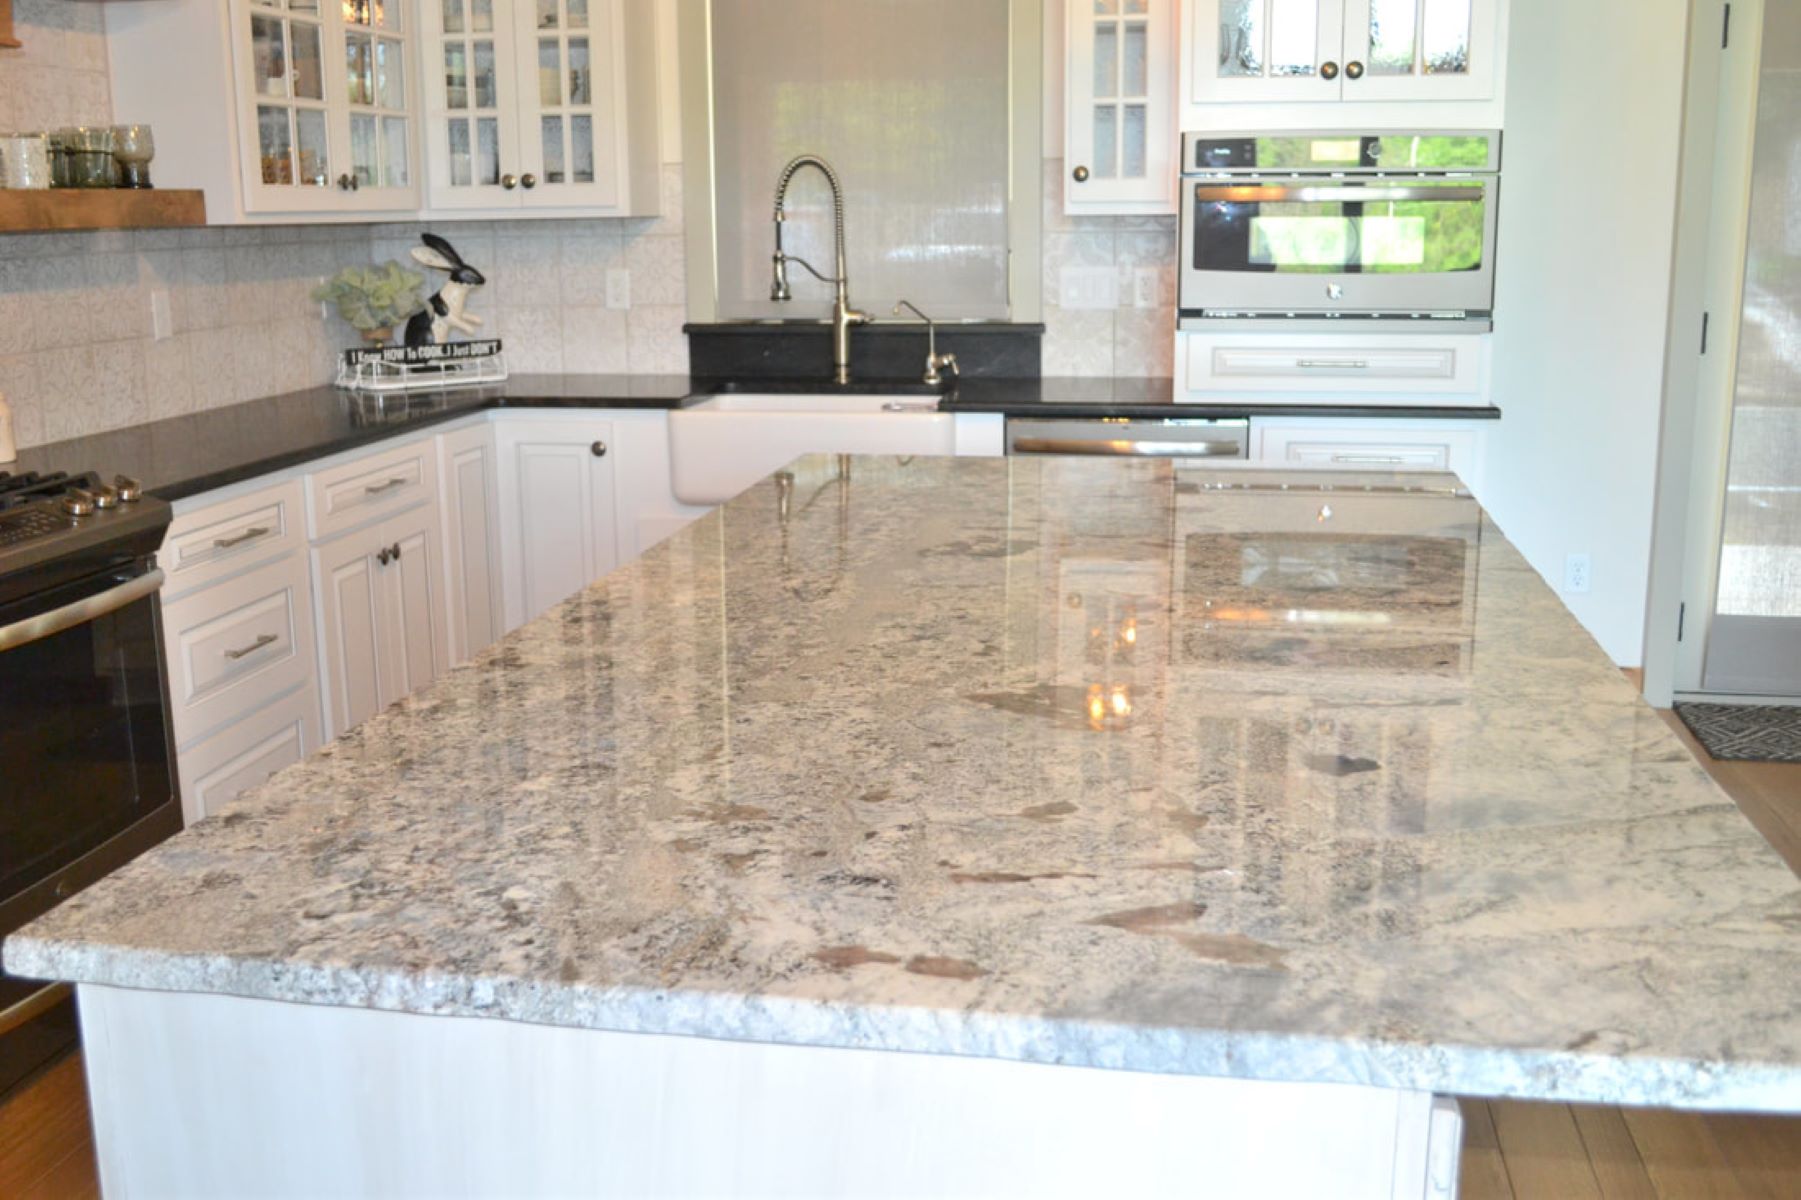 How To Change The Color Of Granite Countertops